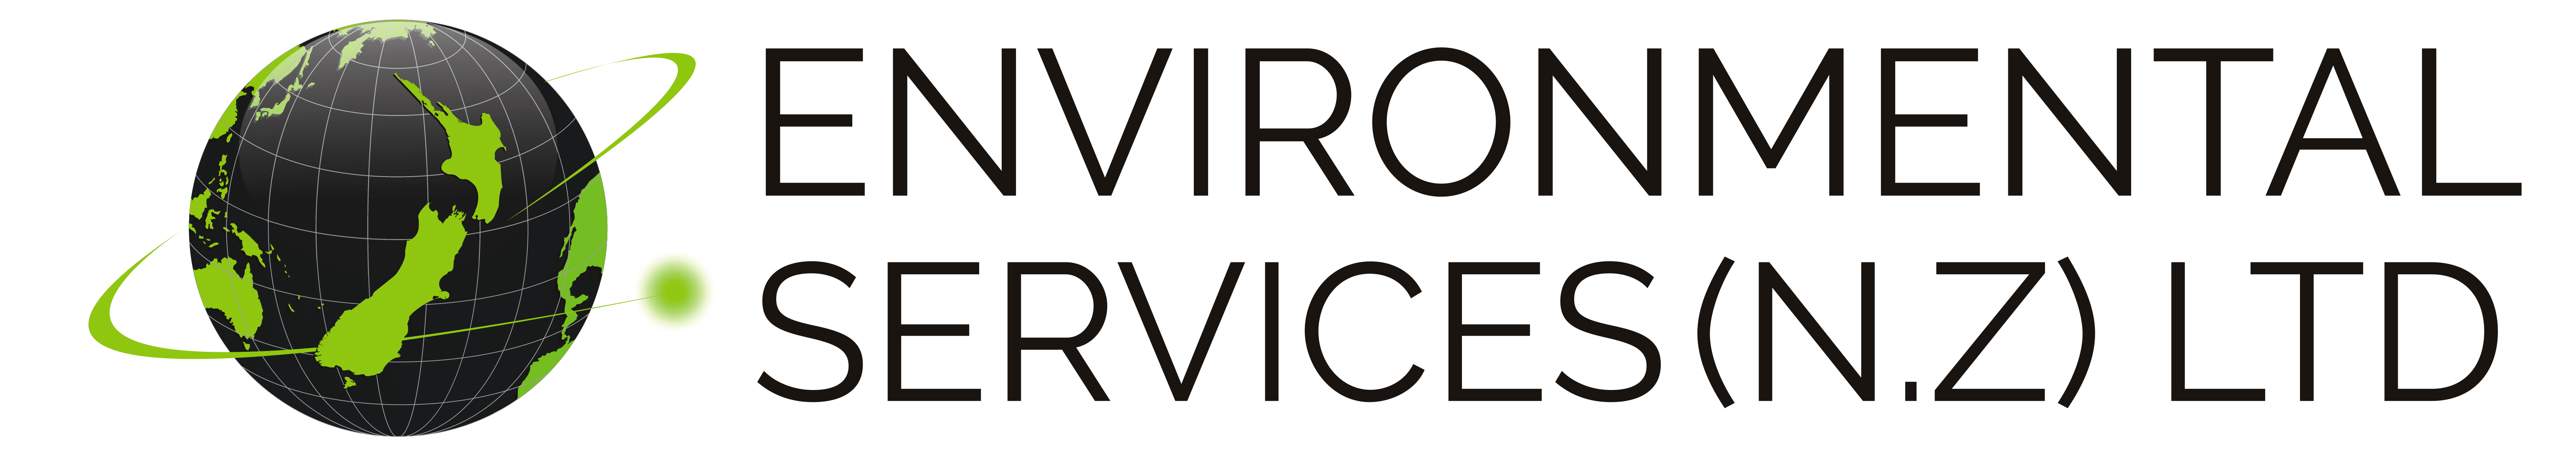 cropped-cropped-Environmental-Services-Logo-1.png